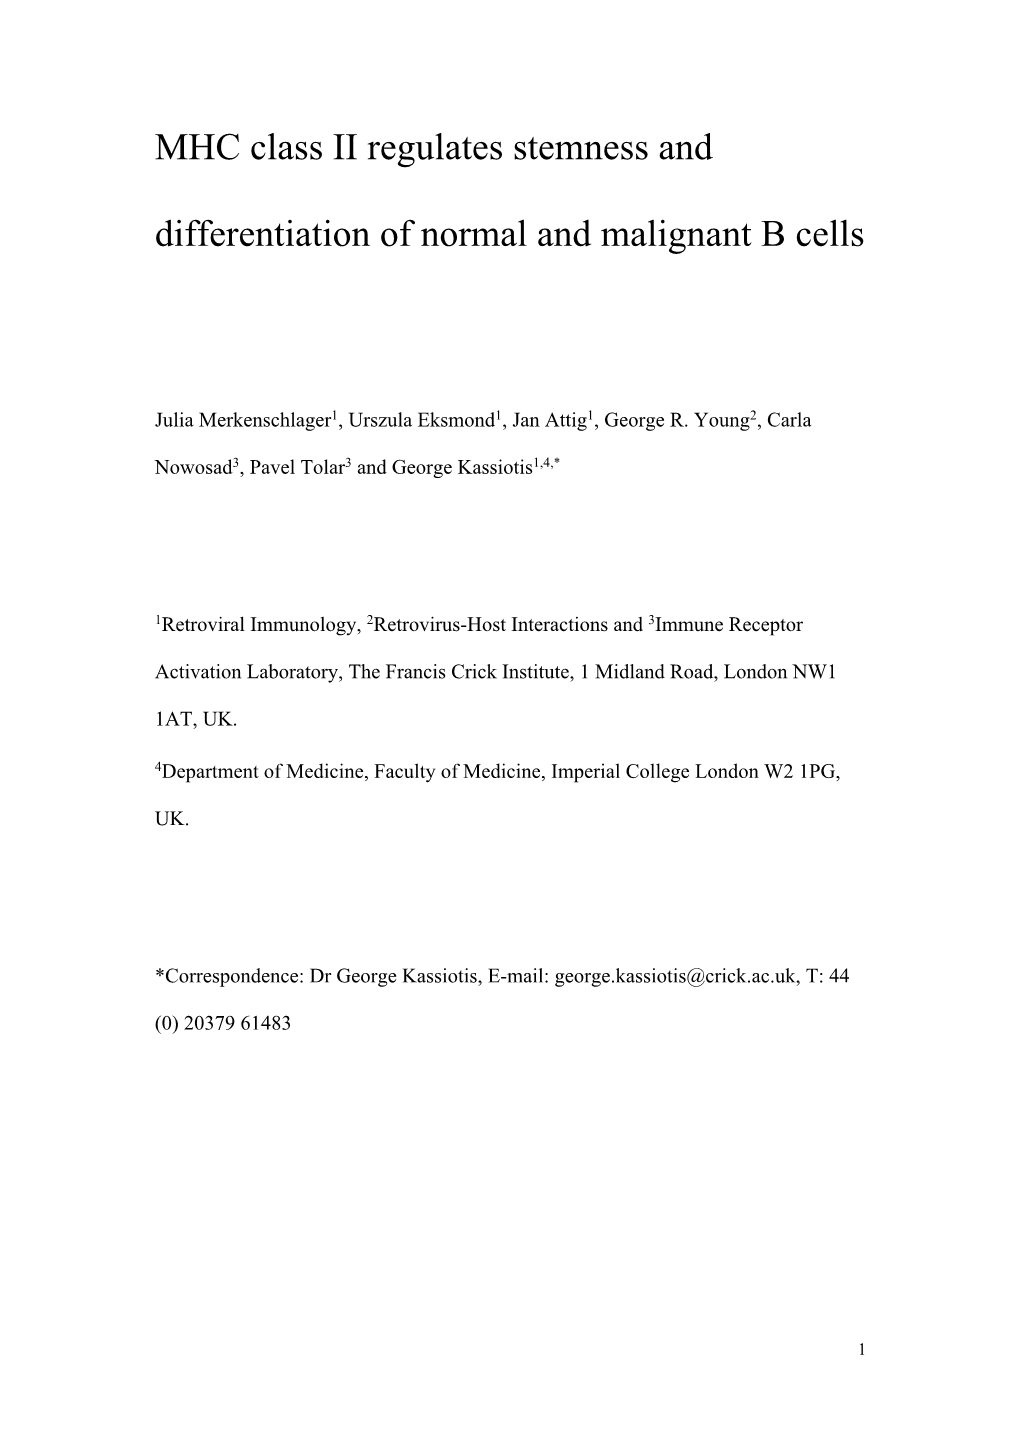 MHC Class II Regulates Stemness and Differentiation of Normal and Malignant B Cells